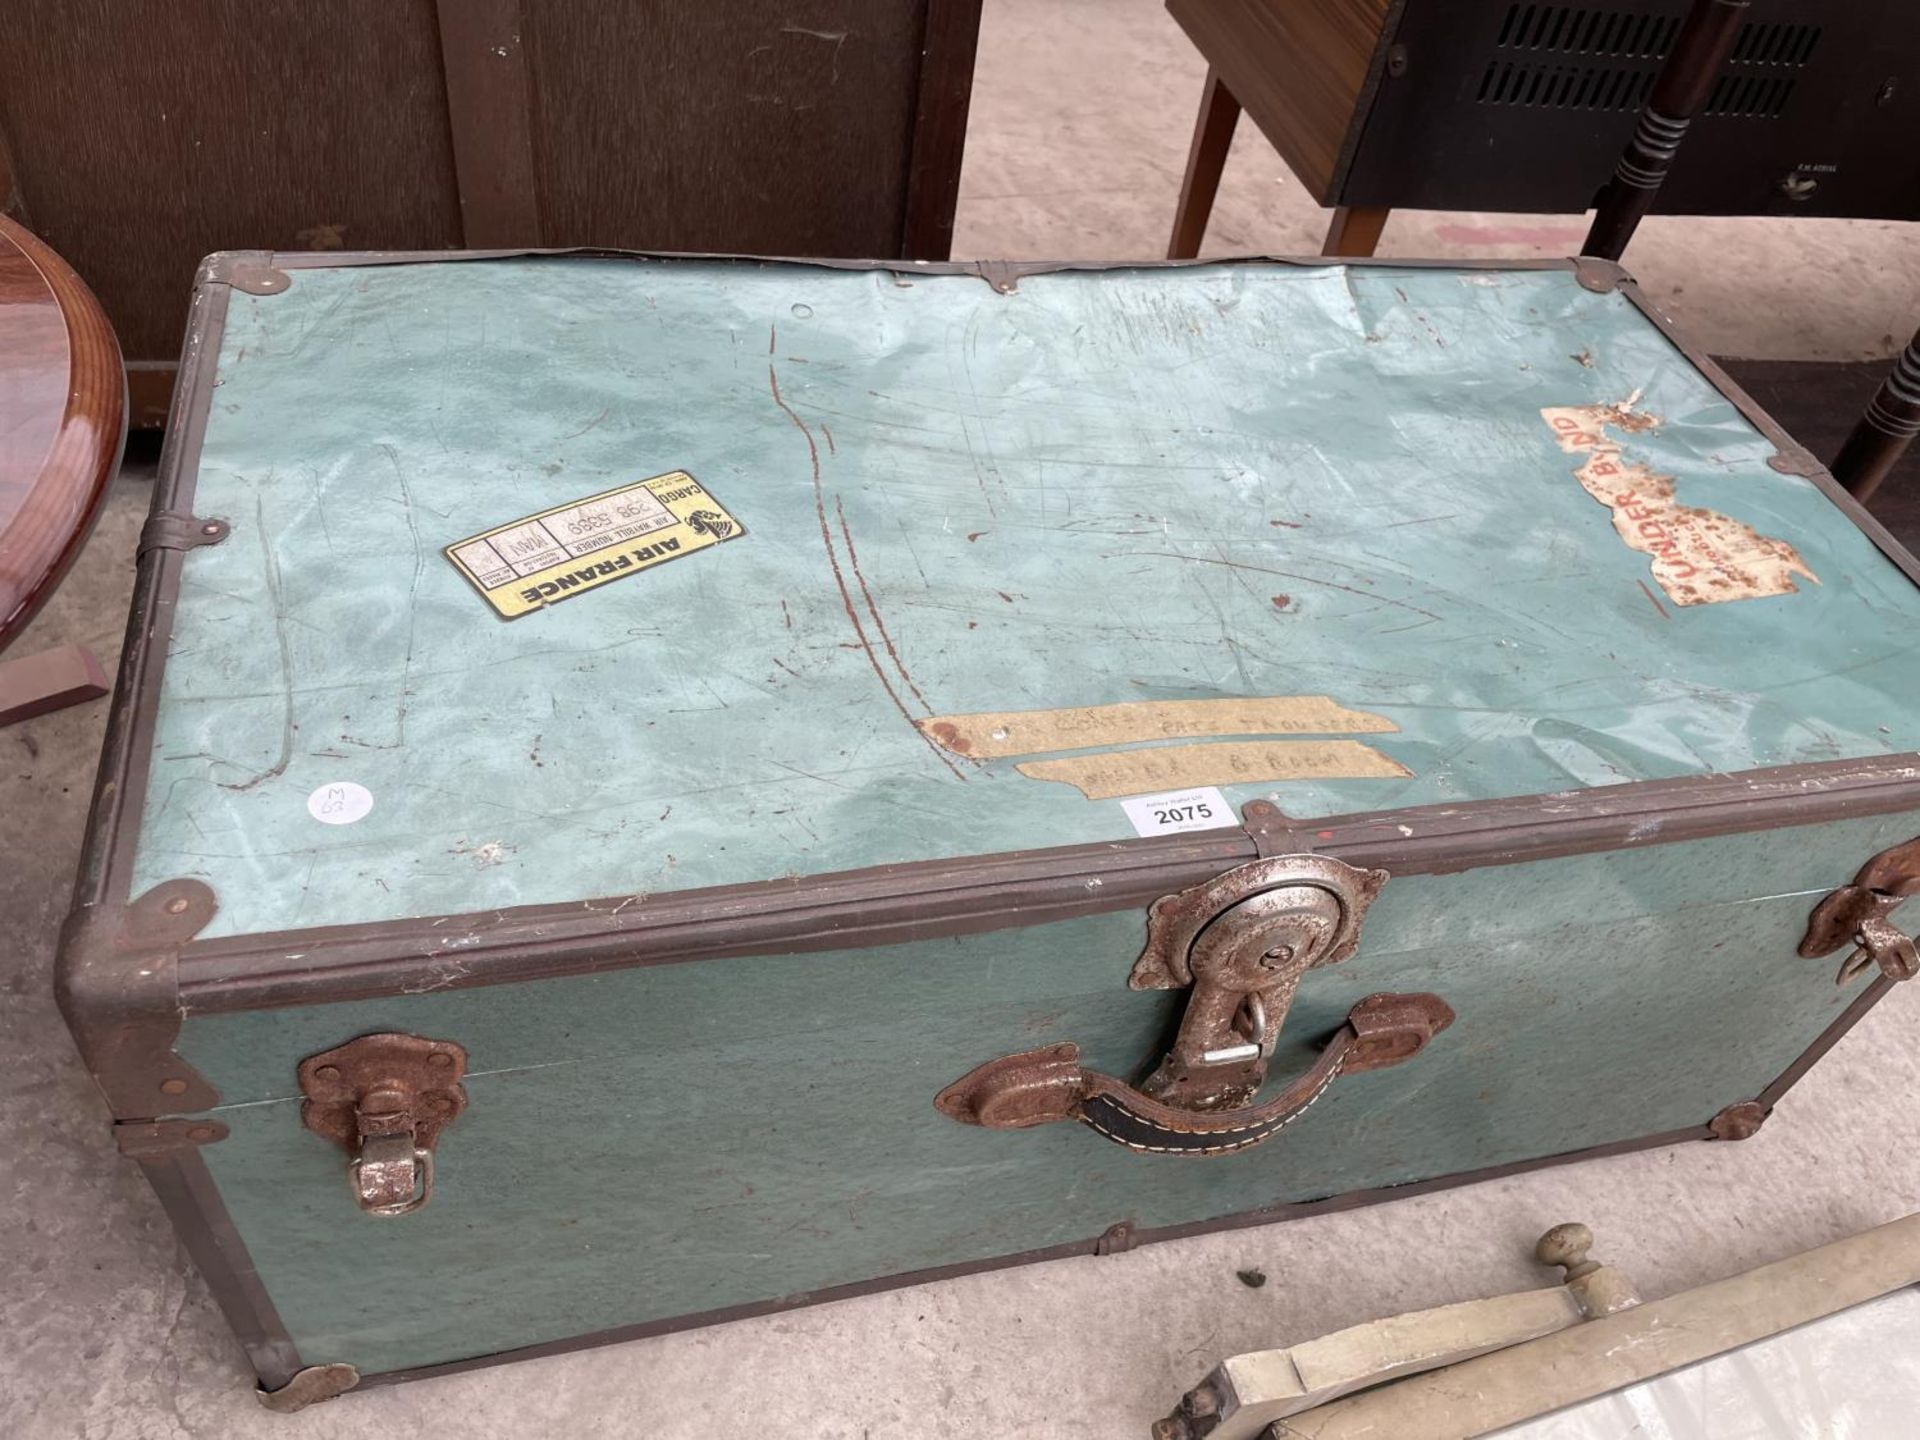 A METAL FRAMED TRAVEL TRUNK AND PAINTED MIRROR - Image 2 of 4